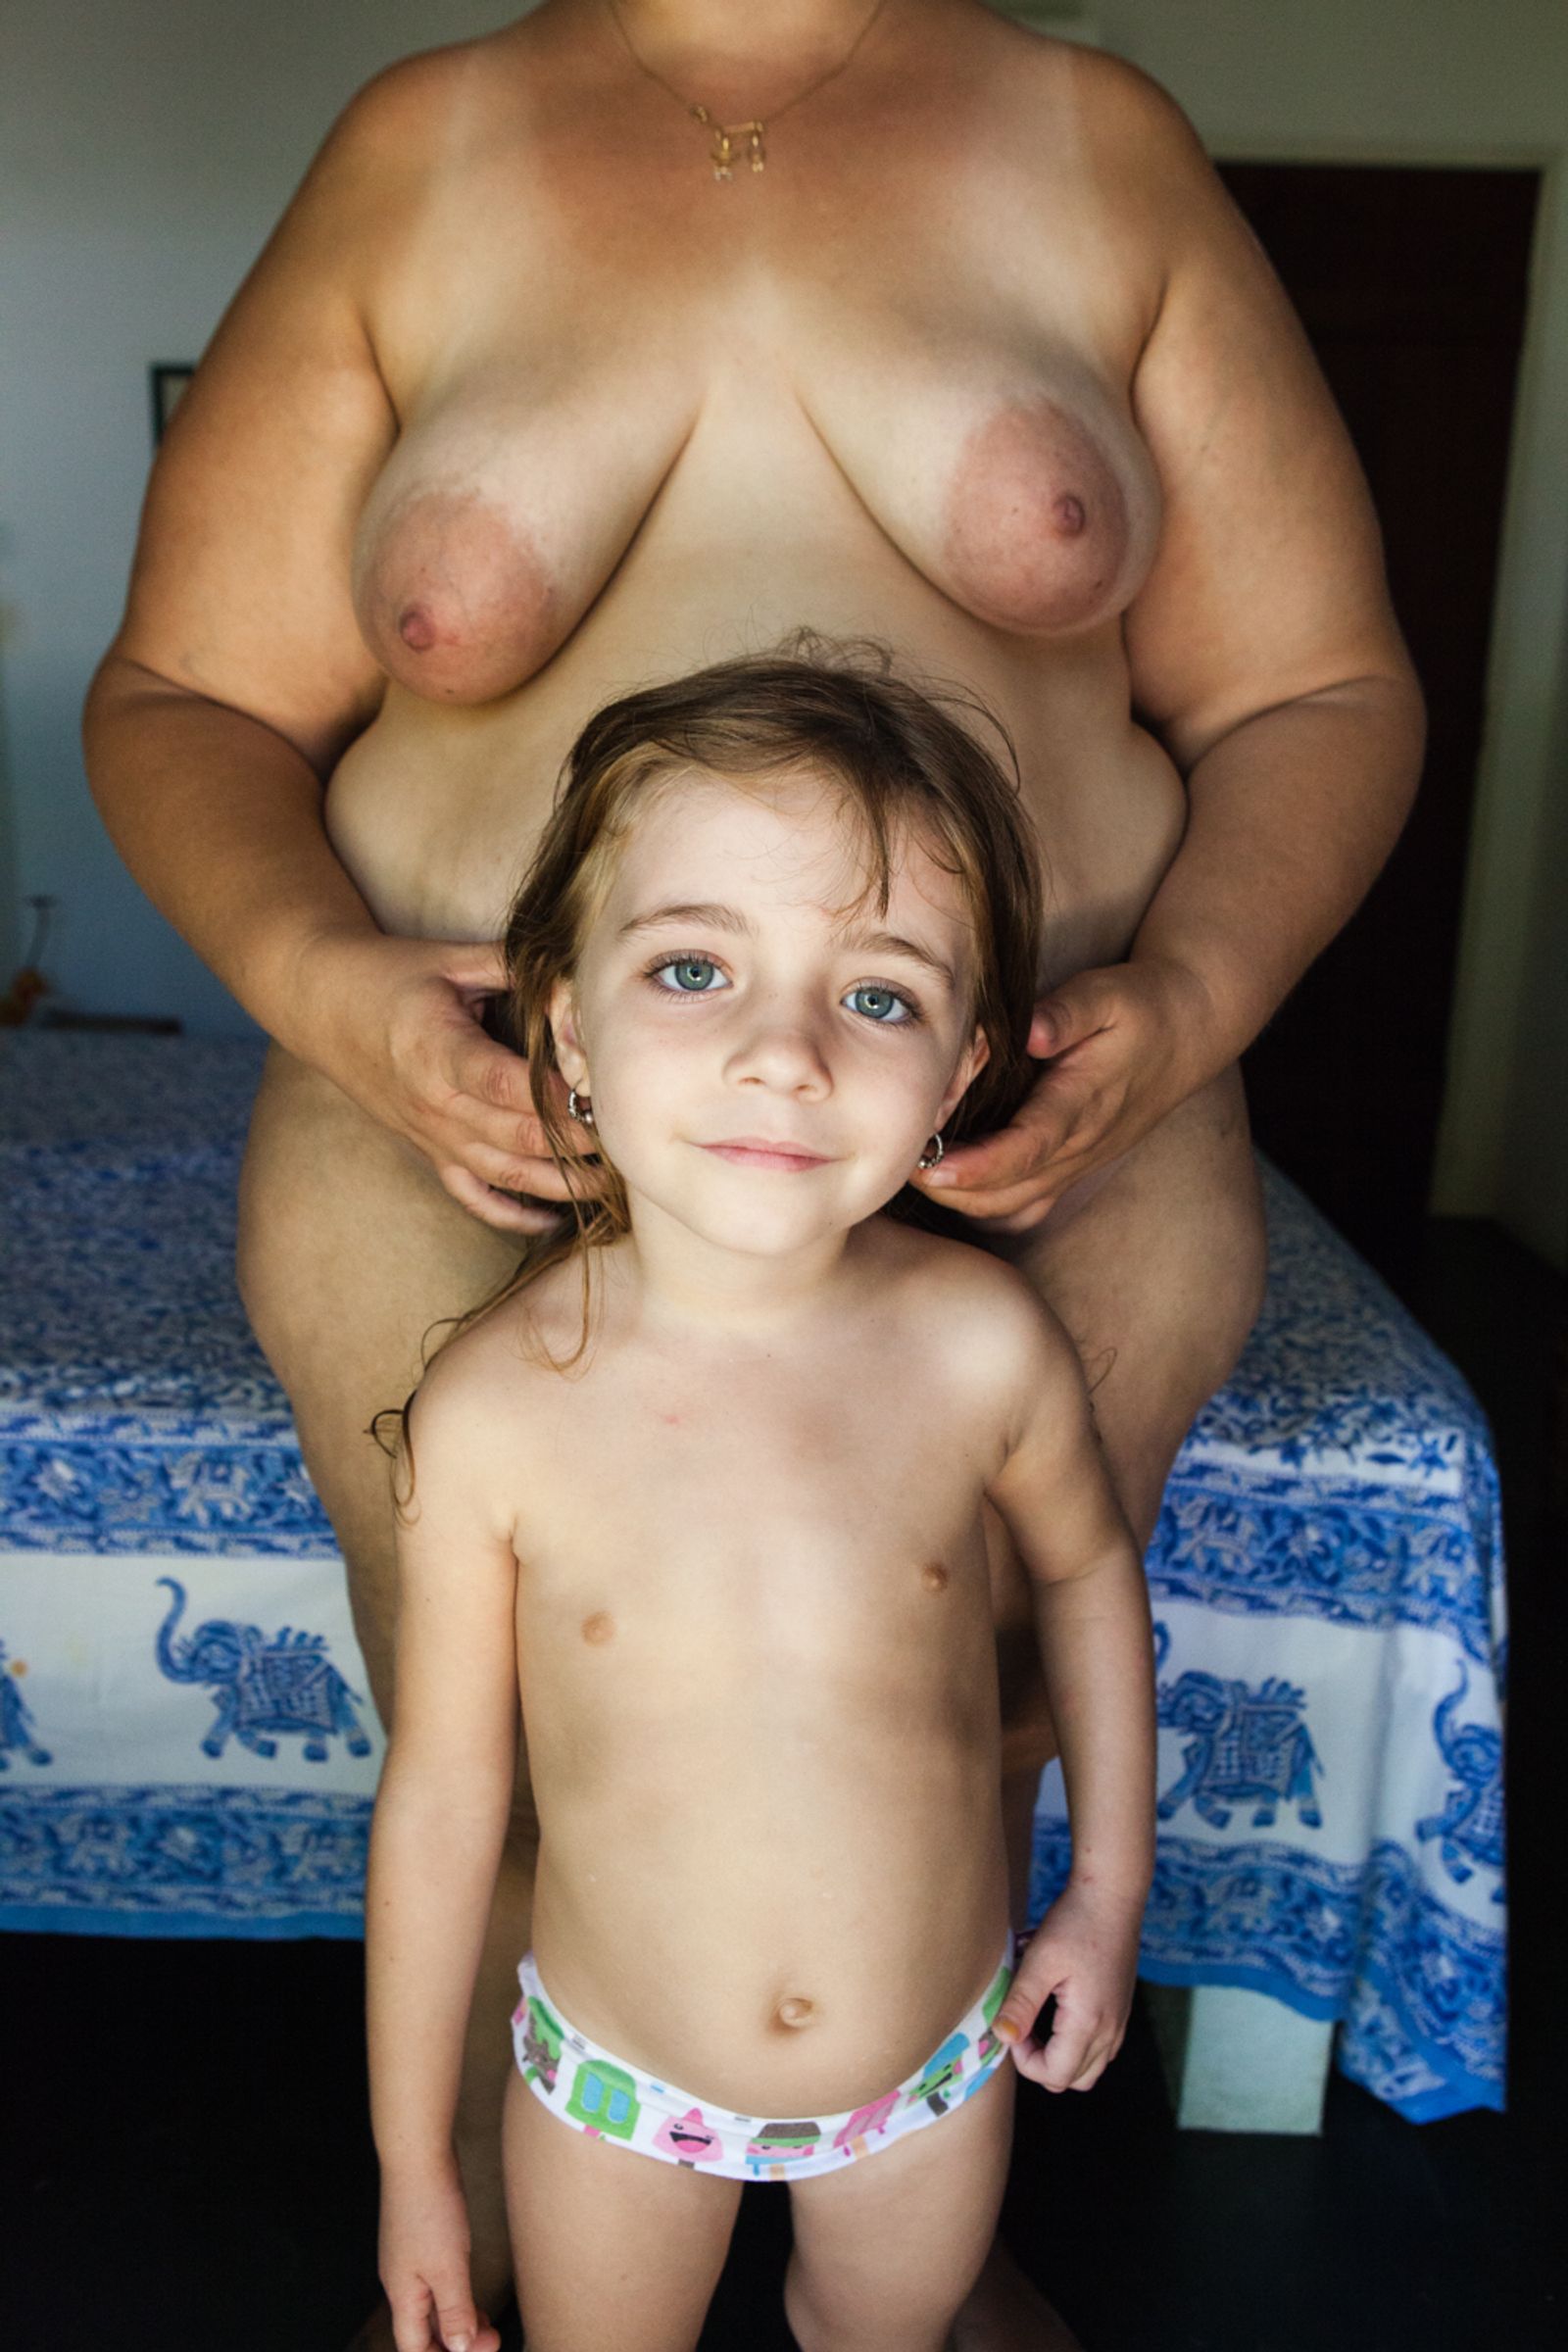 © Leticia Valverdes - Image from the BIRTH MARKS- OBSTETRIC VIOLENCE IN BRAZIL, A CONTEMPORARY HUMAN RIGHTS ISSUE photography project